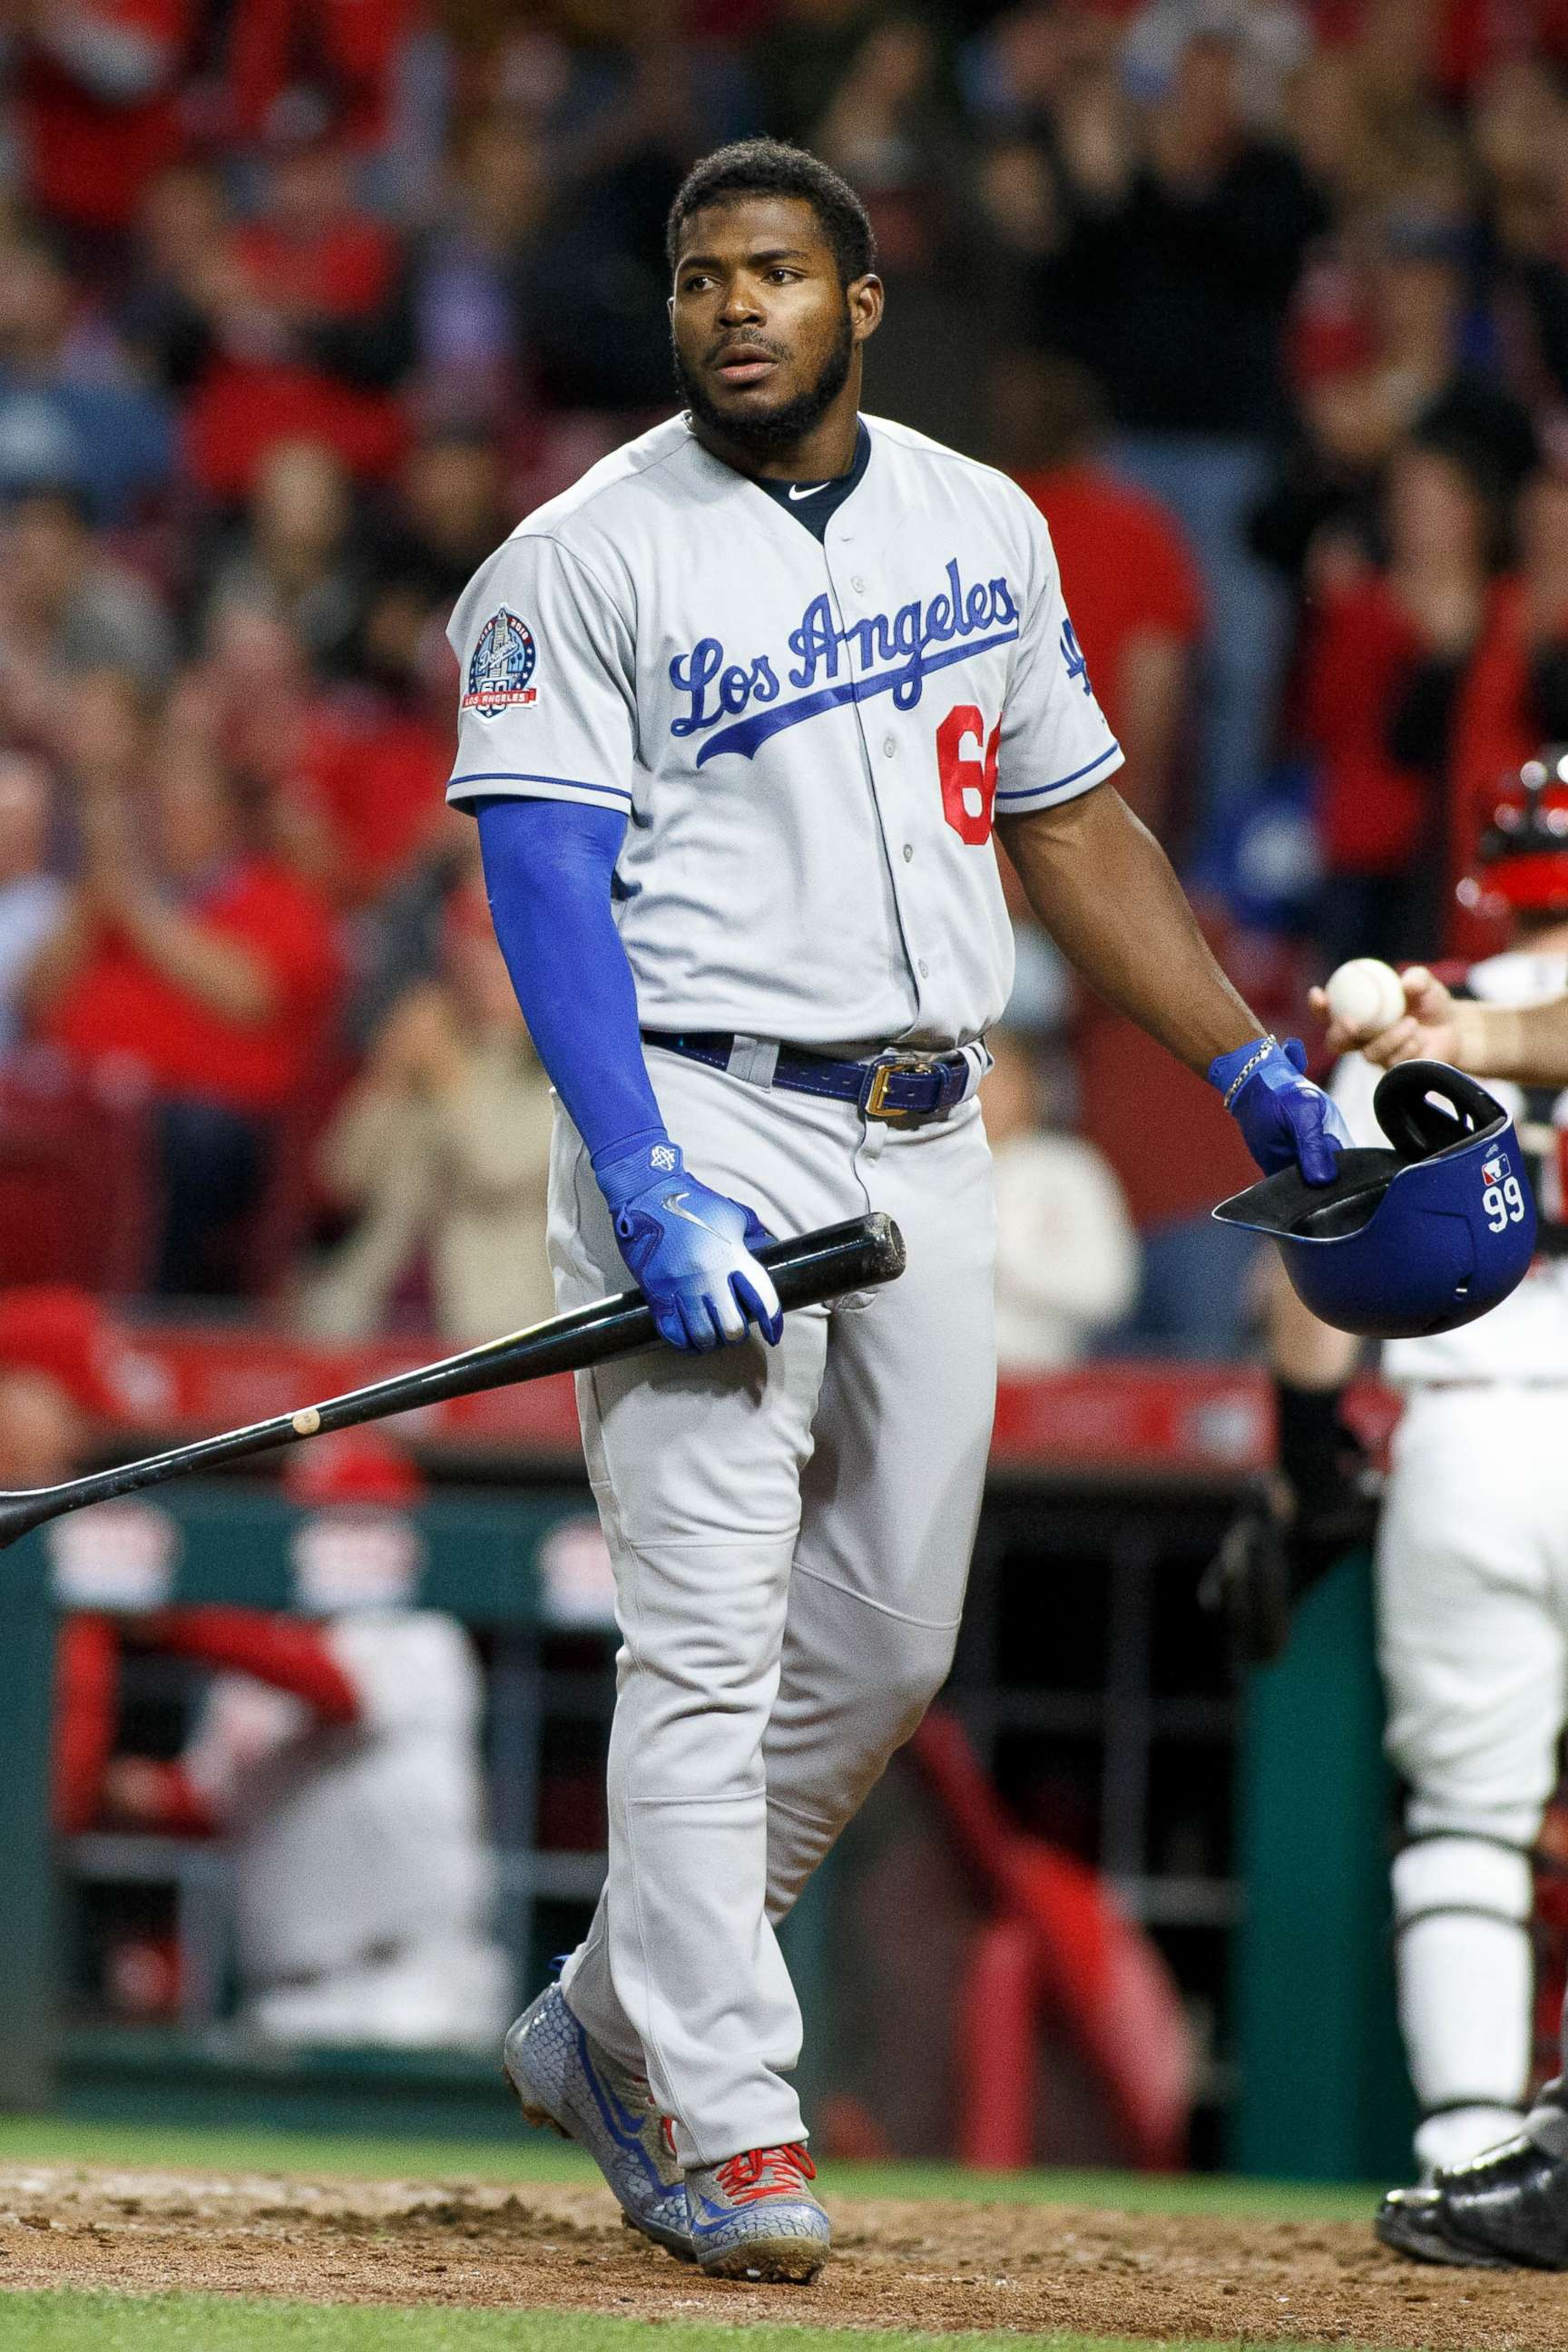 PHOTO: Yasiel Puig of the Los Angeles Dodgers reacts after grounding out against the Cincinnati Reds on Sept. 10, 2018 in Cincinnati, Ohio.